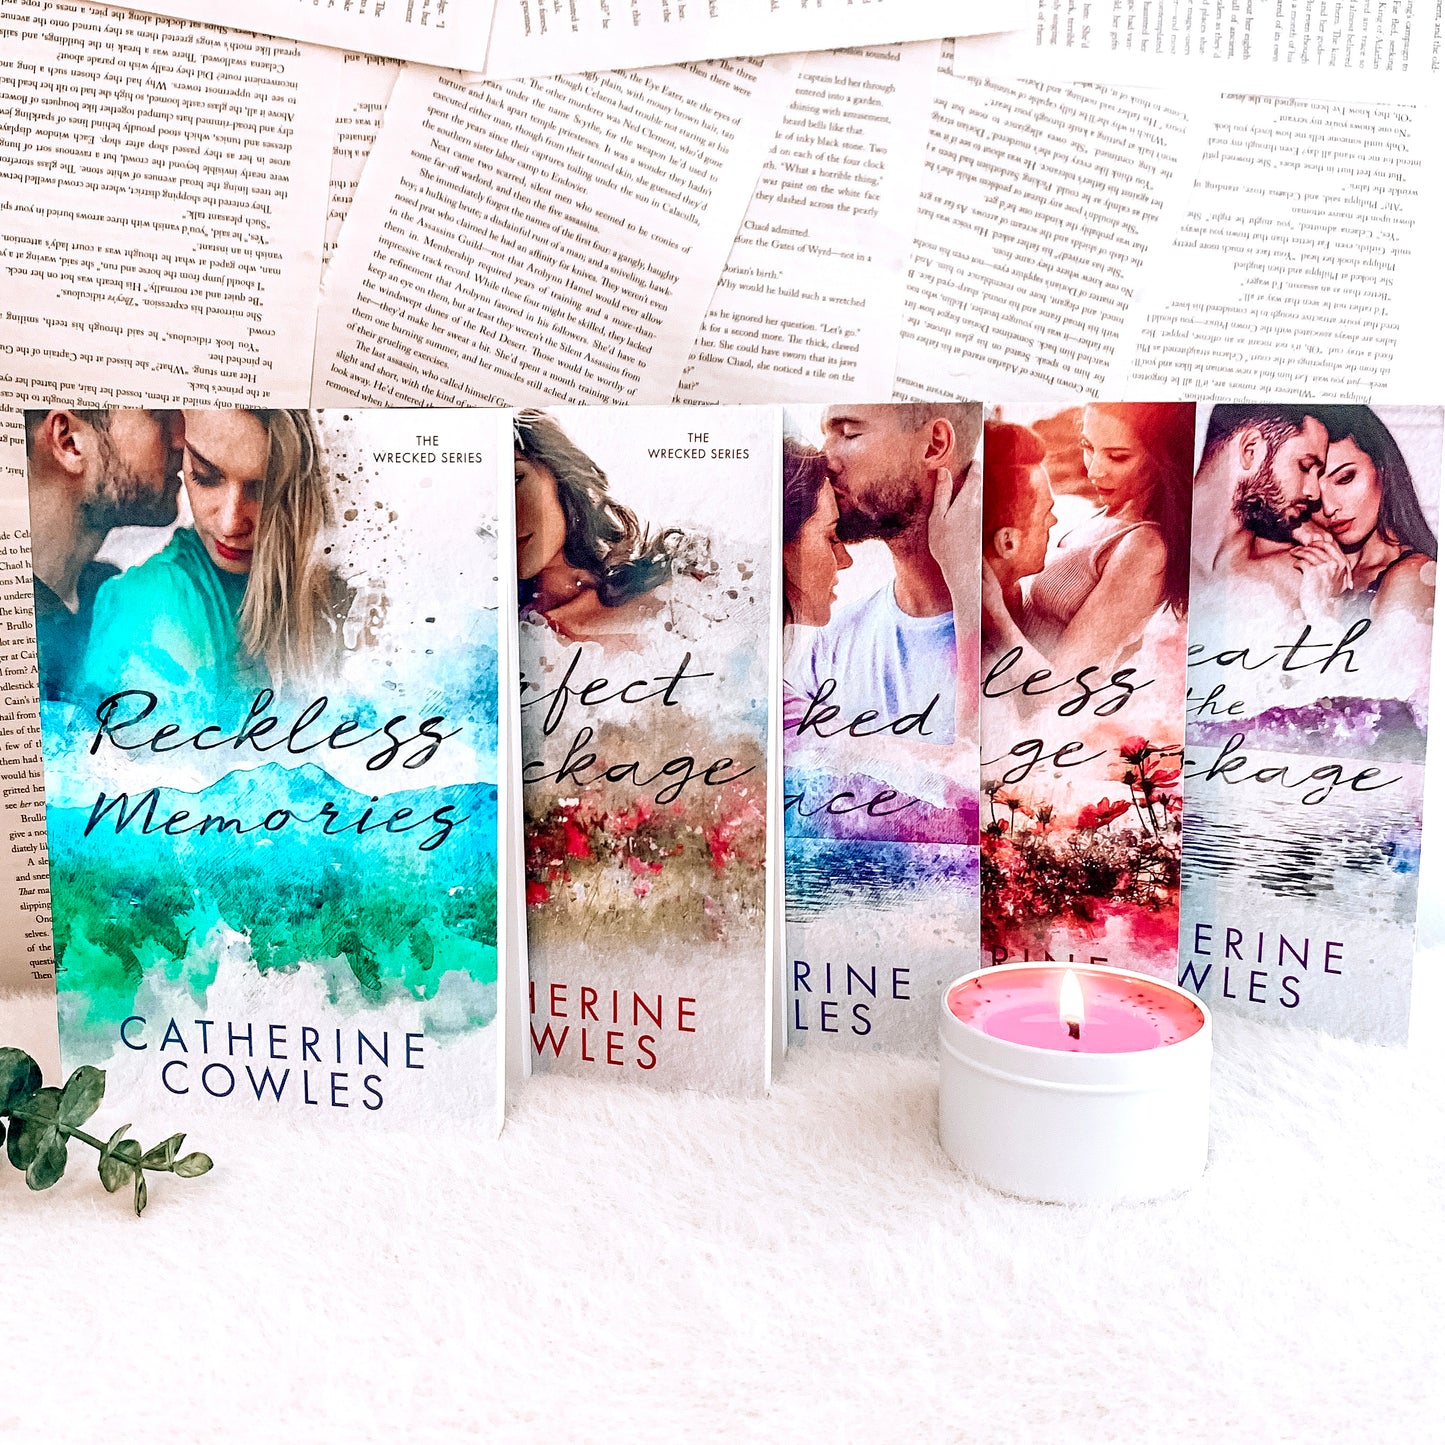 Wrecked series by Catherine Cowles